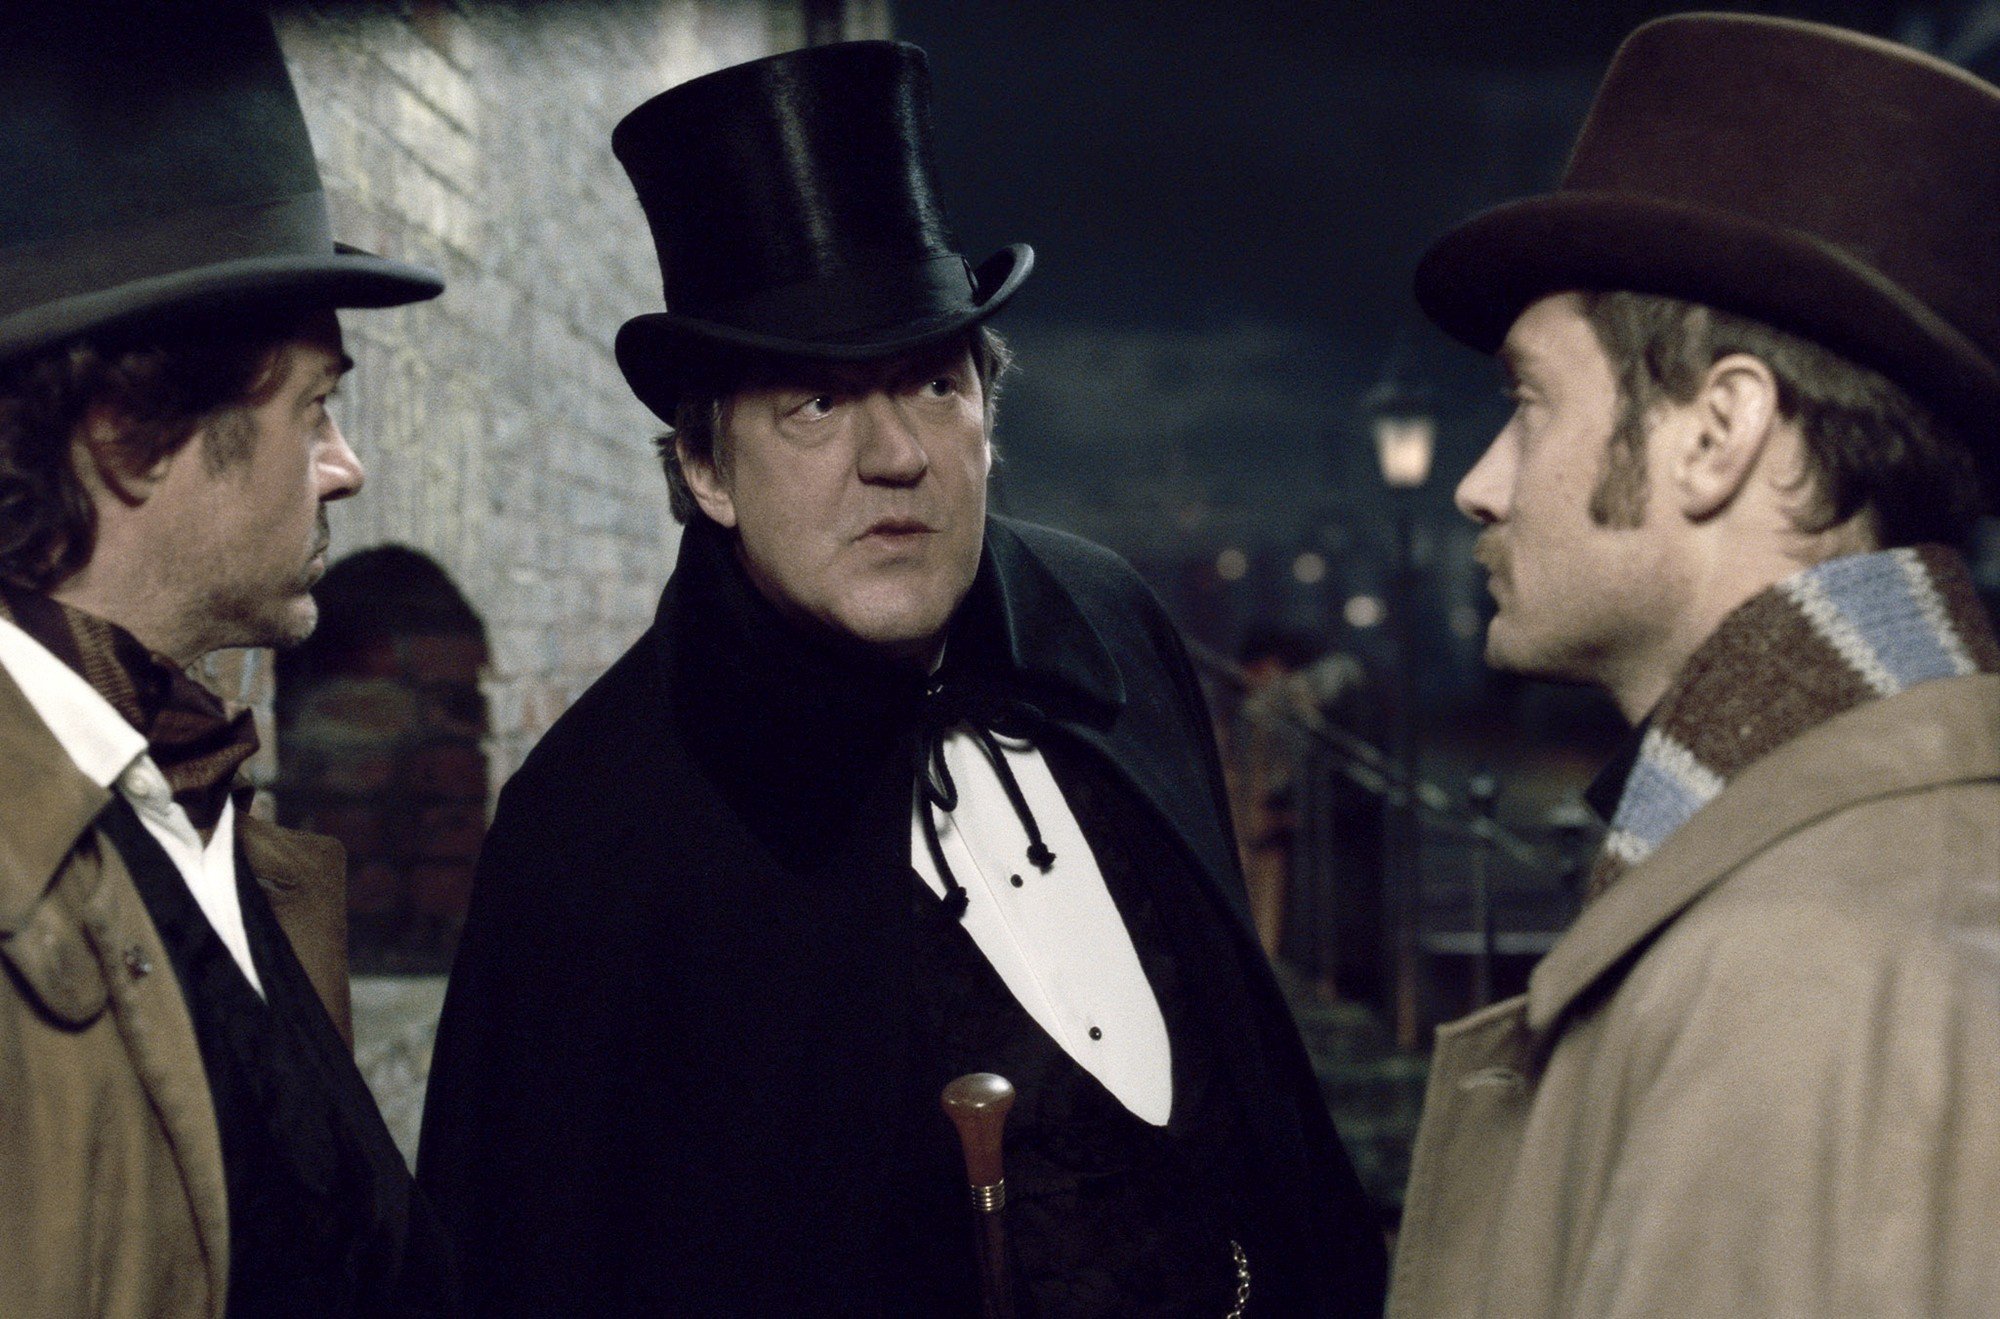 Robert Downey Jr., Stephen Fry and Jude Law in Warner Bros. Pictures' Sherlock Holmes: A Game of Shadows (2011)